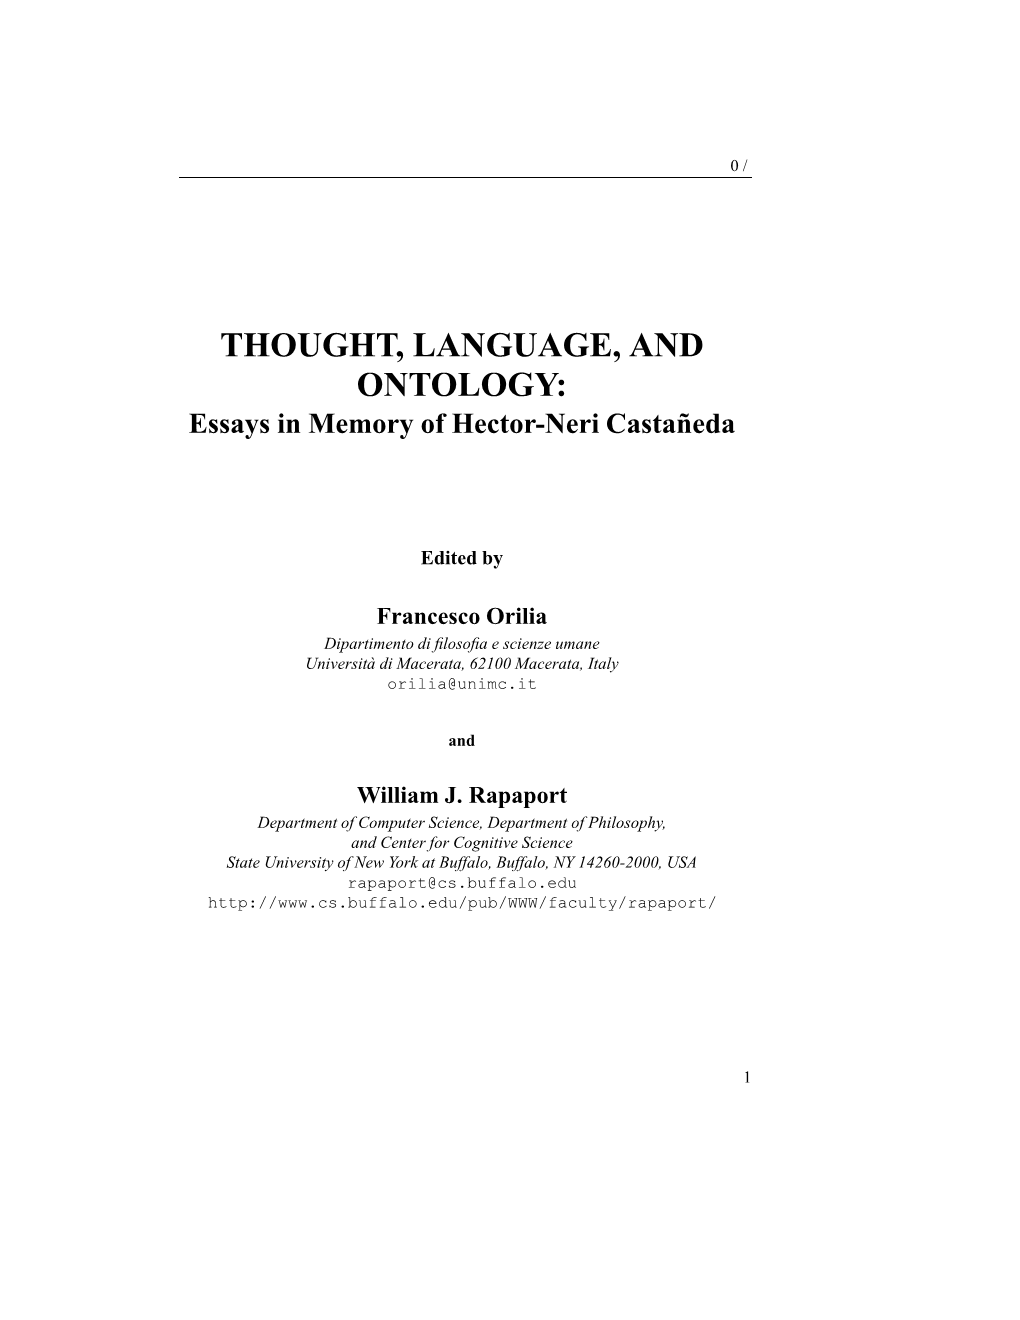 THOUGHT, LANGUAGE, and ONTOLOGY: Essays in Memory of Hector-Neri Castanedaä